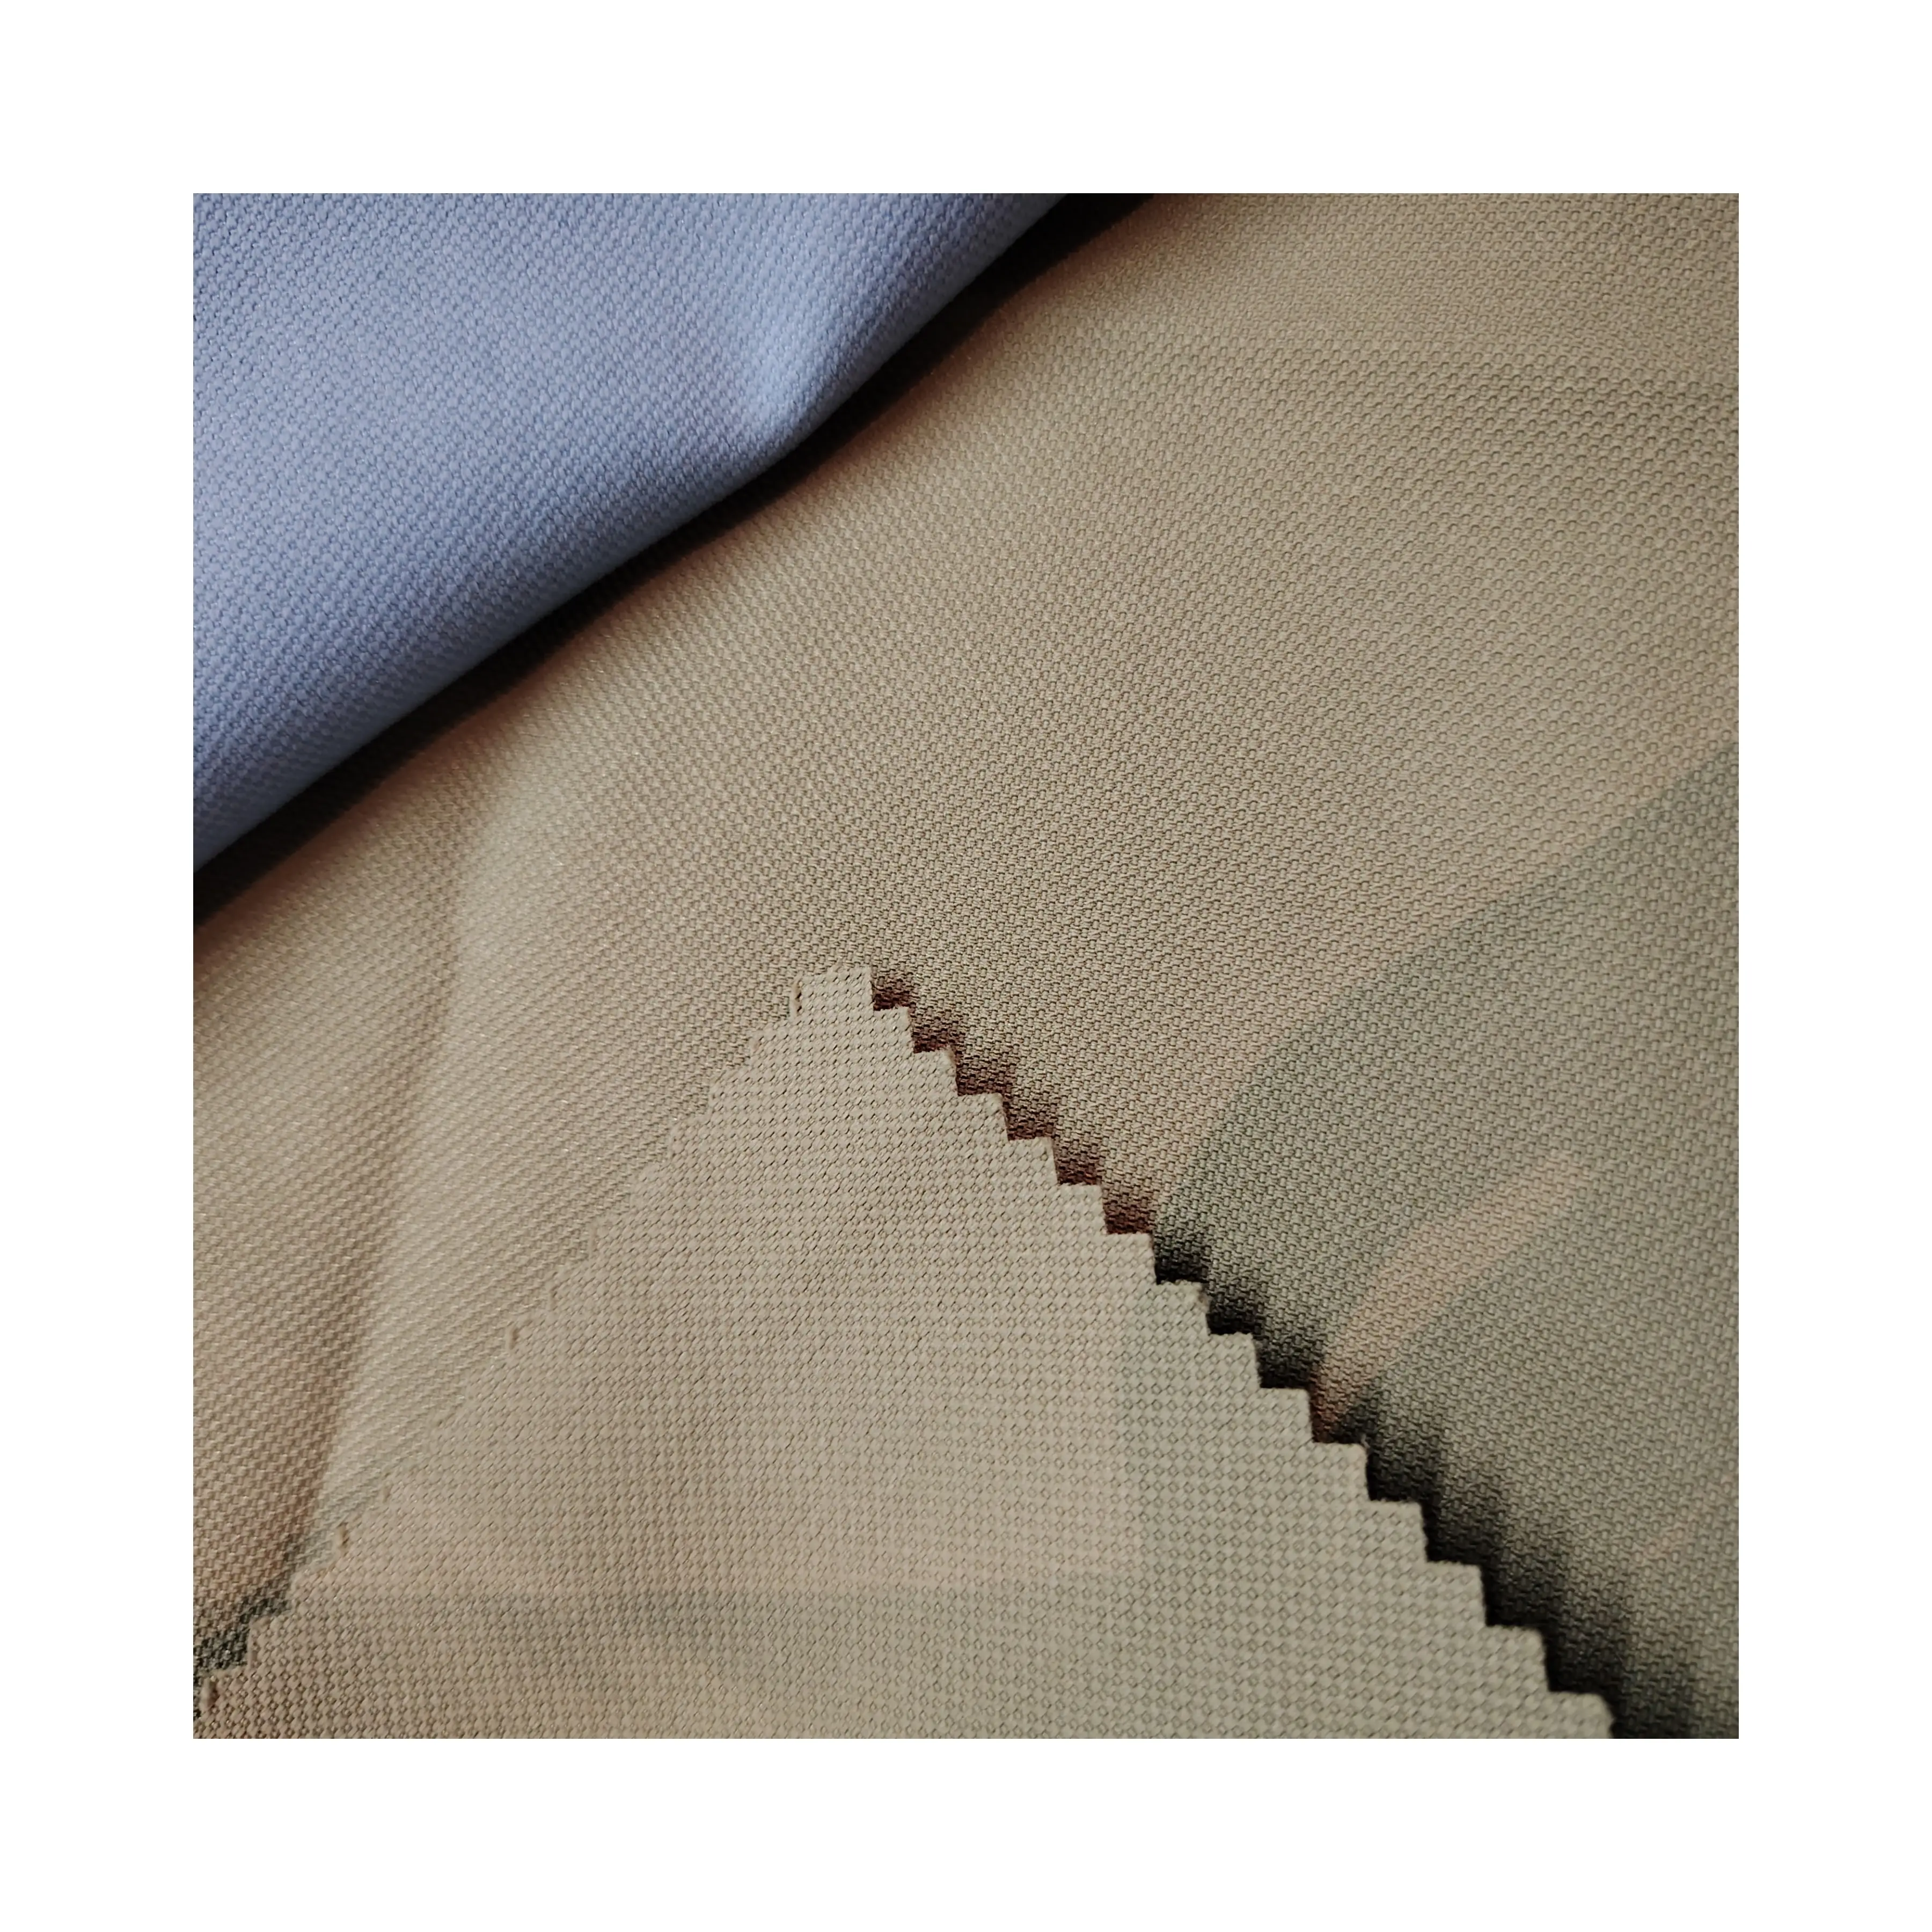 Best-selling 97%T 3%SP pearl dot fabric for trousers, fashion clothing, and stylish garments